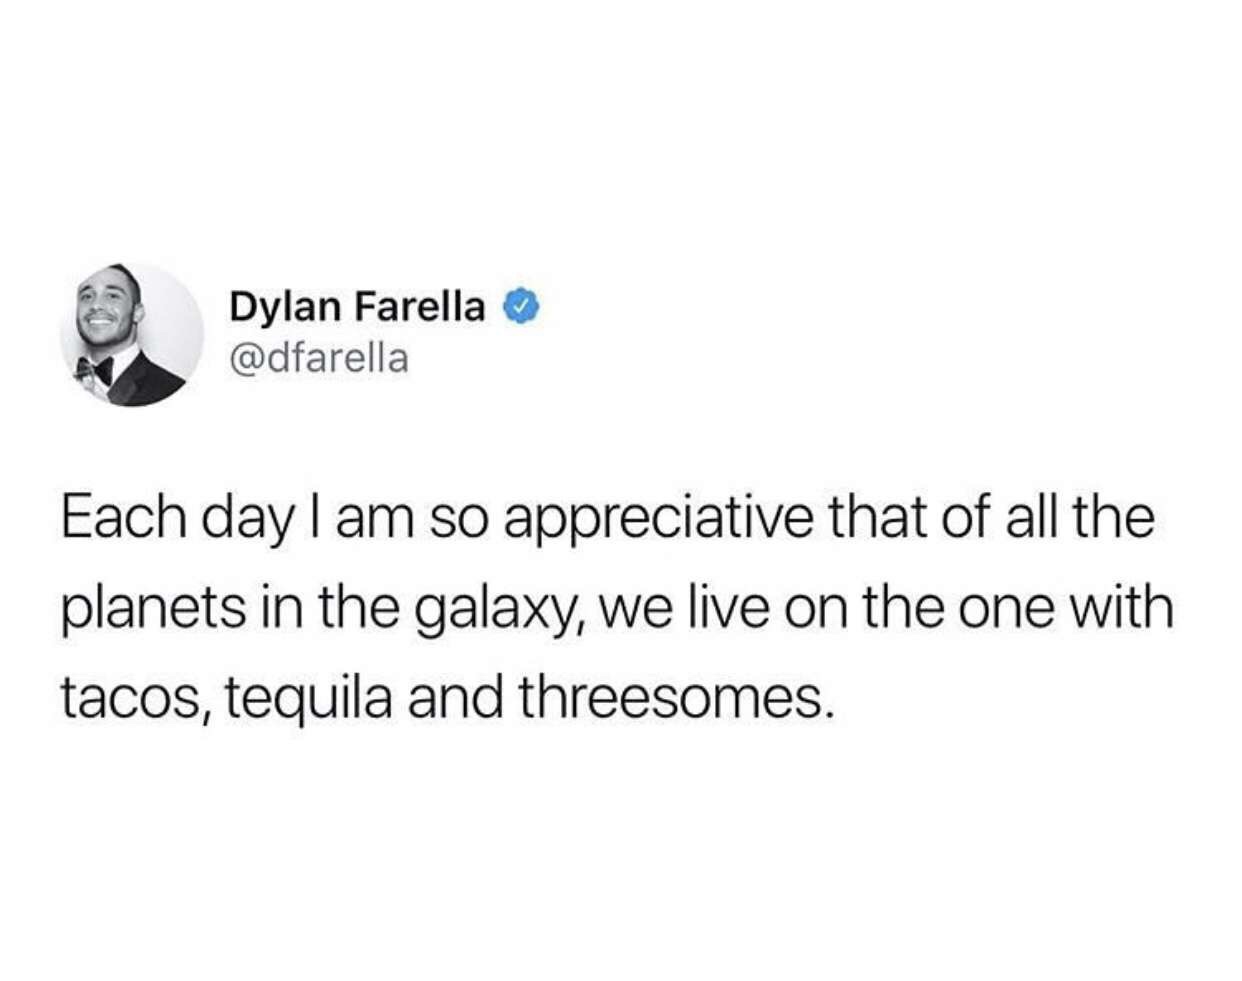 hasafashafsas - Dylan Farella Each day I am so appreciative that of all the planets in the galaxy, we live on the one with tacos, tequila and threesomes.